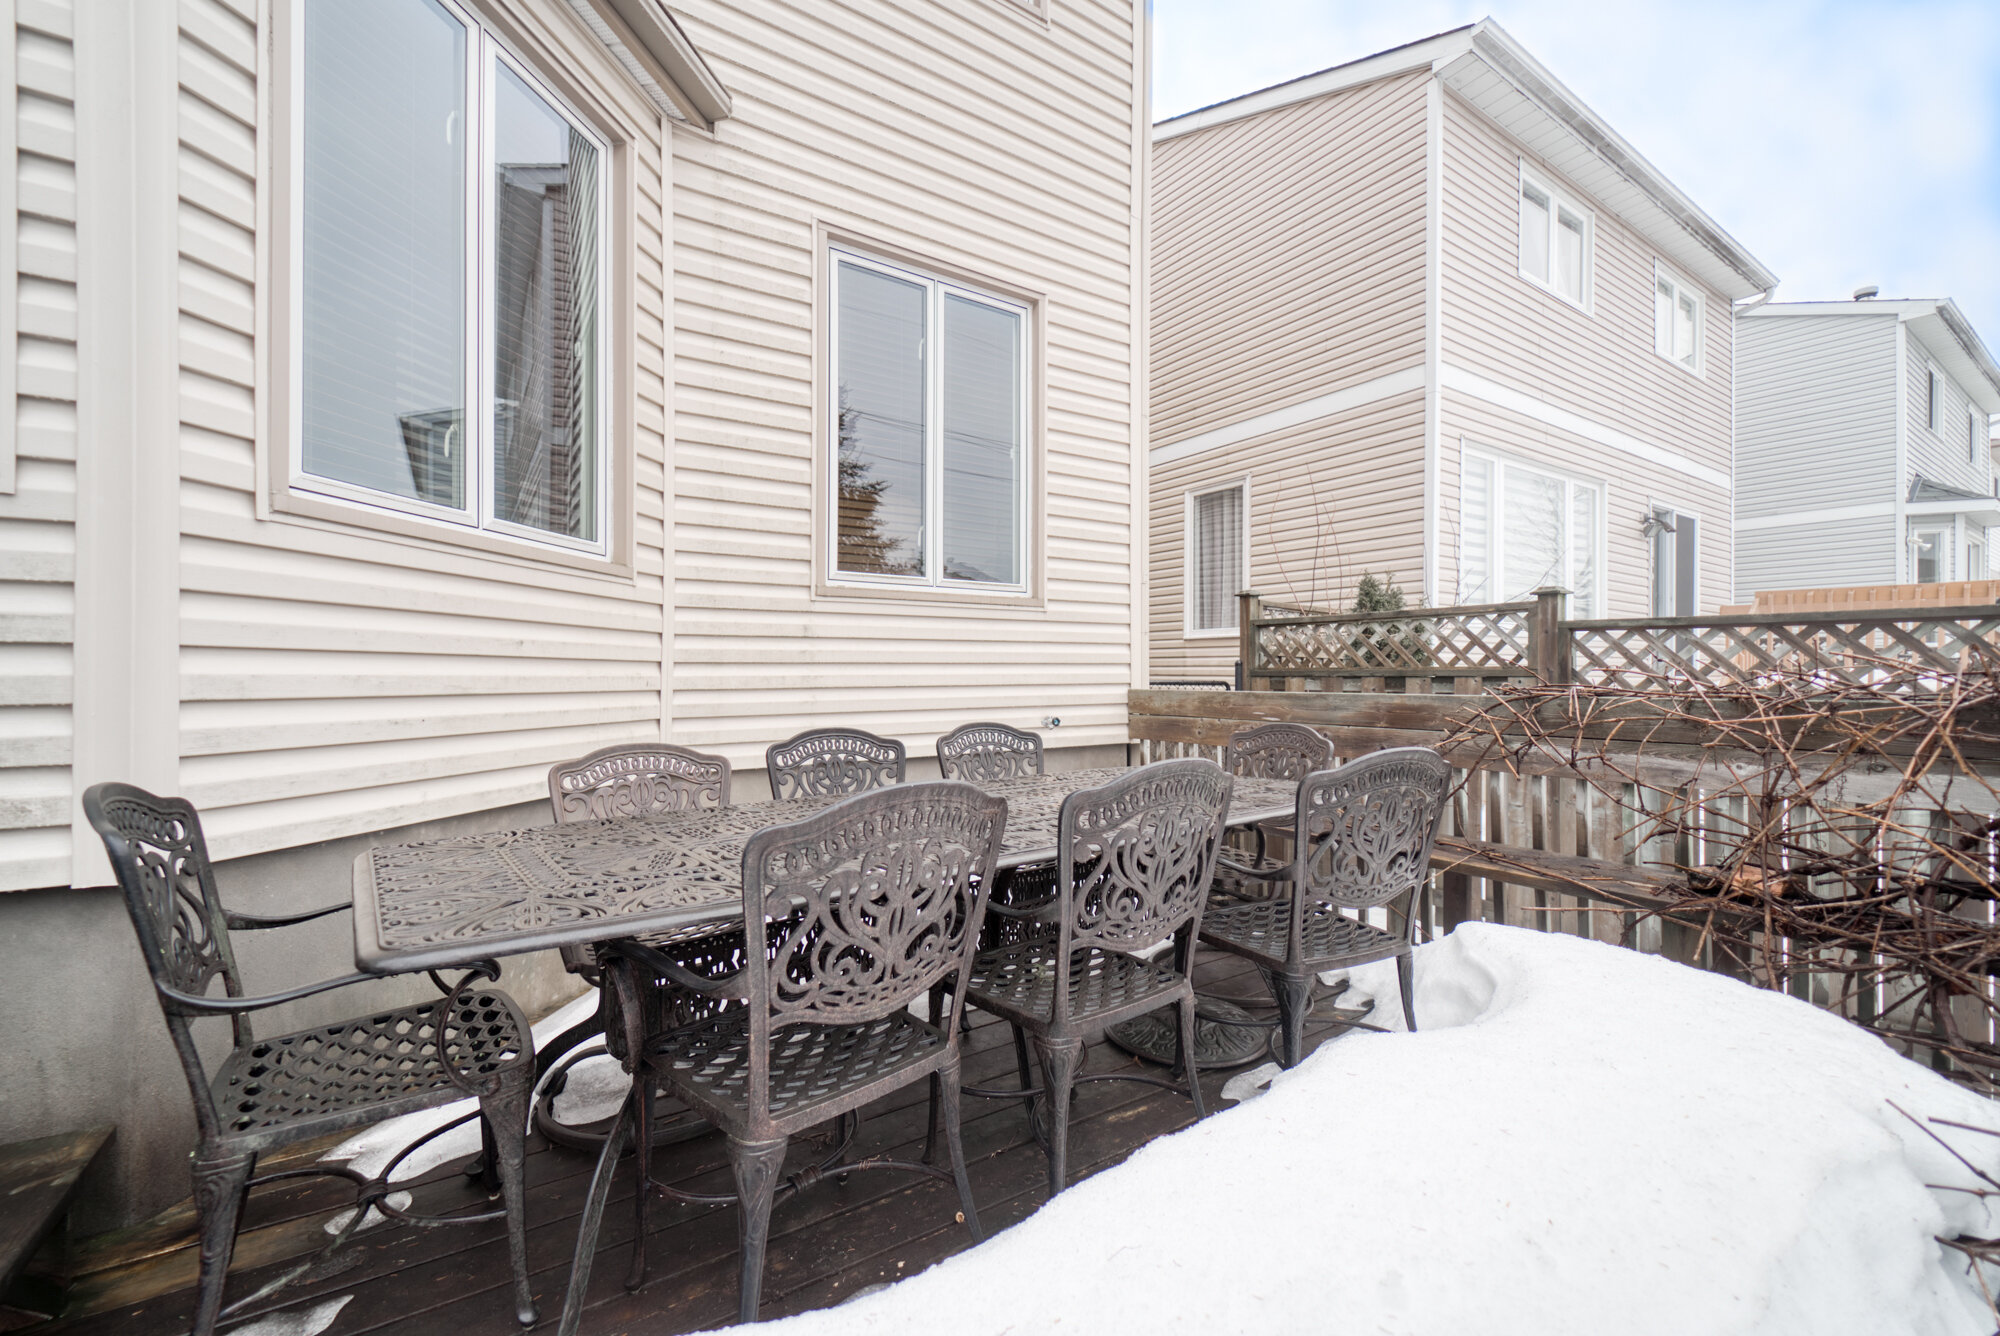 19 Clydesdale Ave - MAR 20 2020-38.jpg